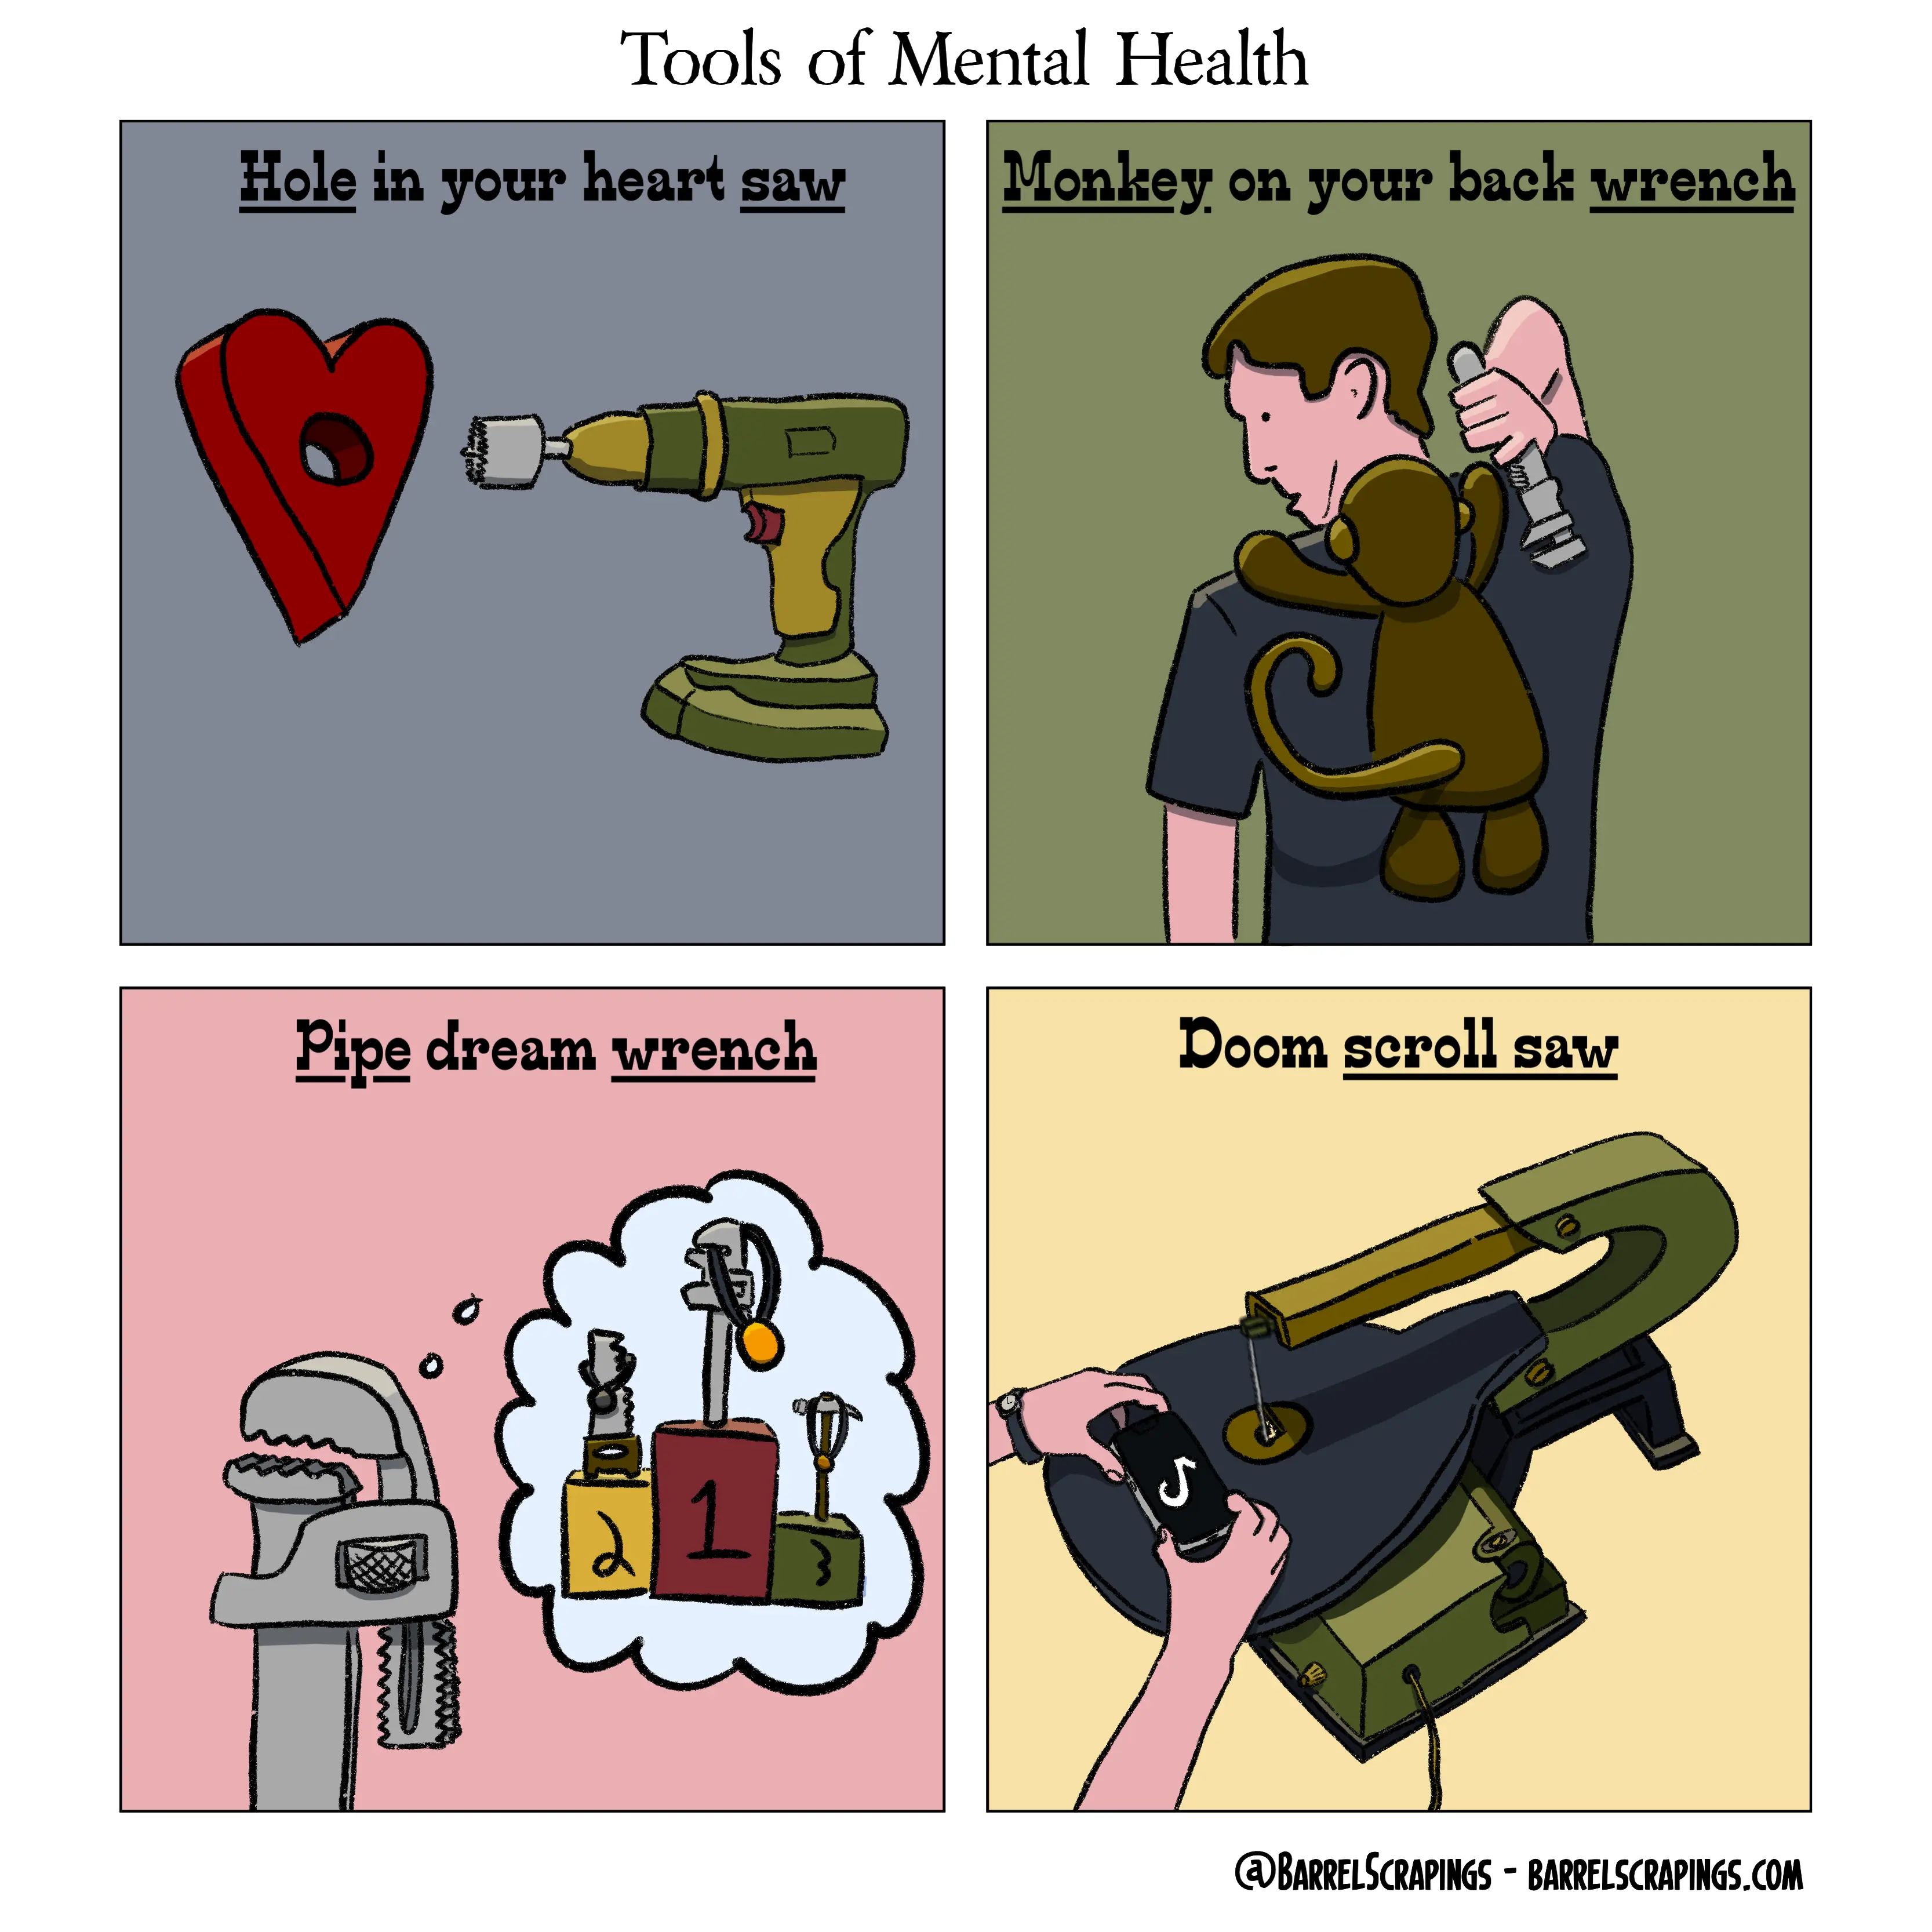 image from Tools of Mental Health